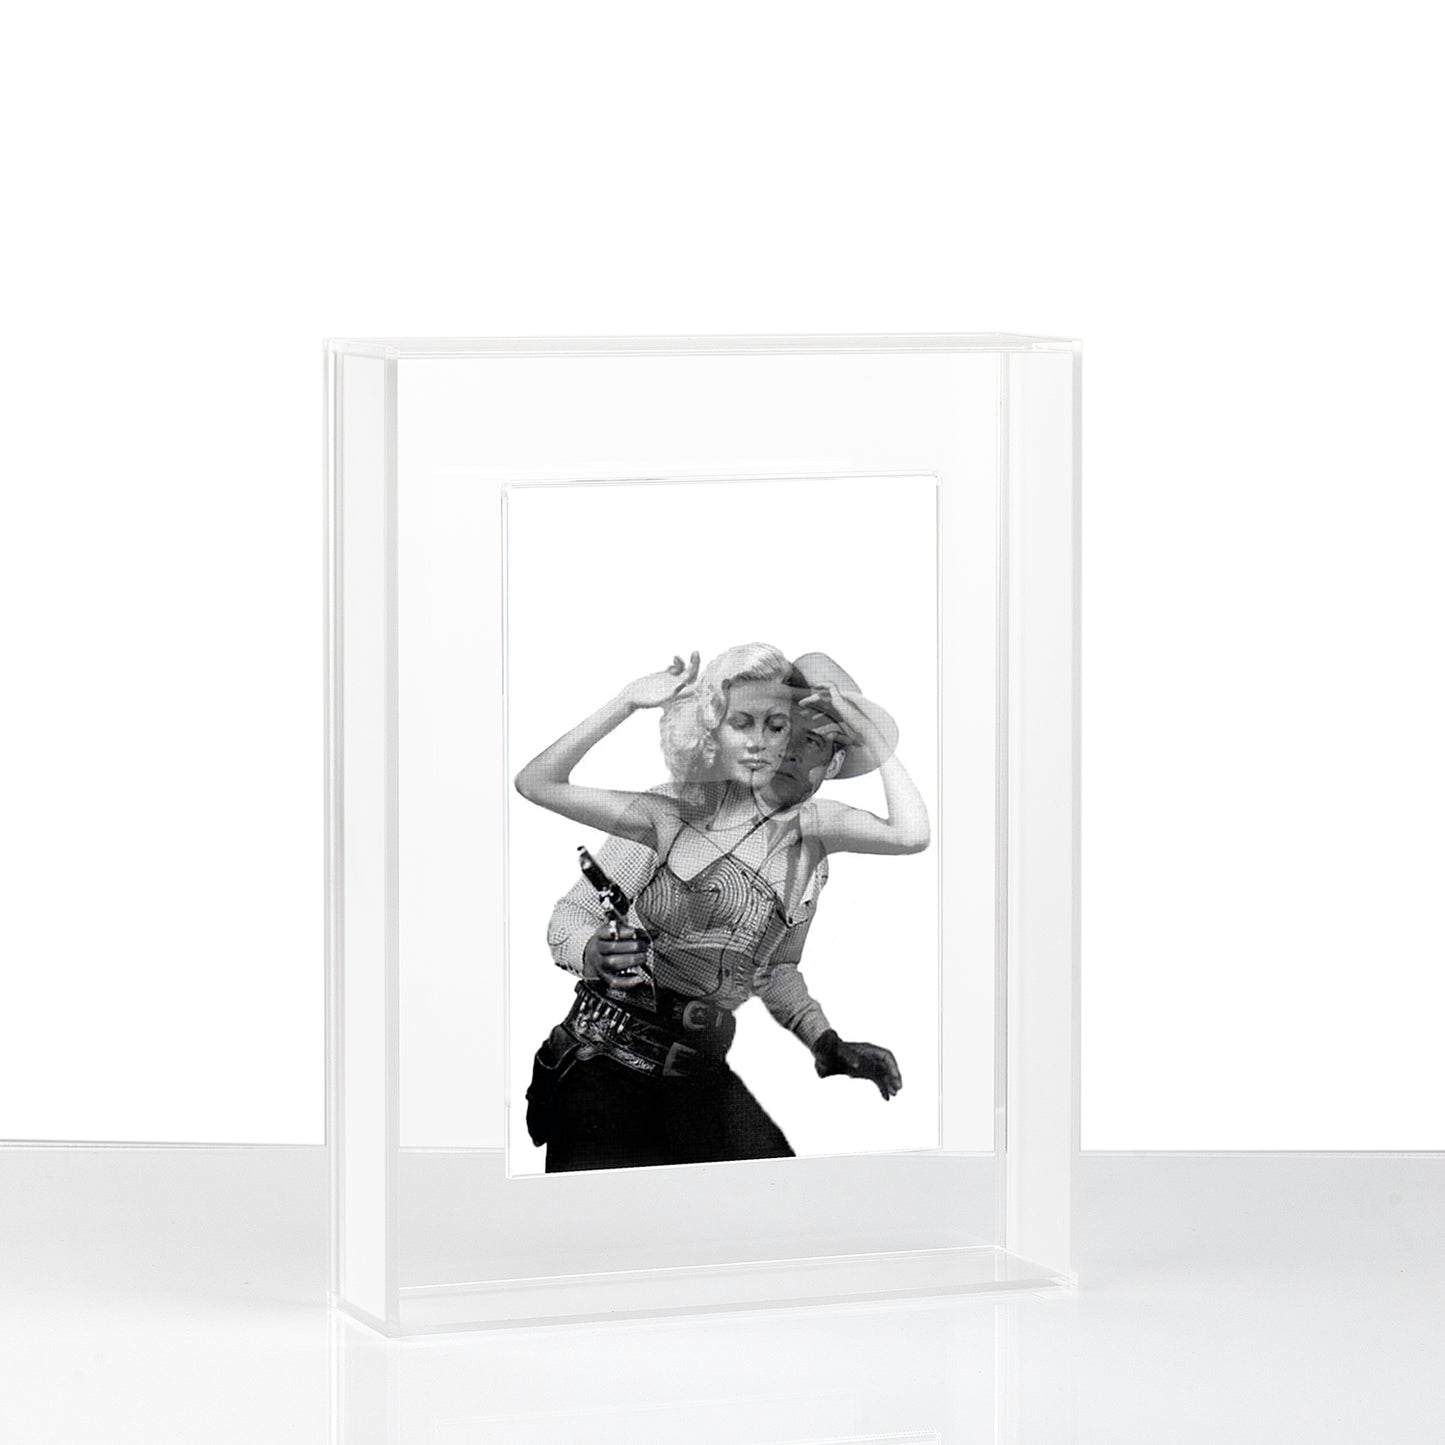 Raise Your Hands by B. Shawn Cox 4x6" Framed In Your Choice of Float Frame with Magnetic Photo Holder